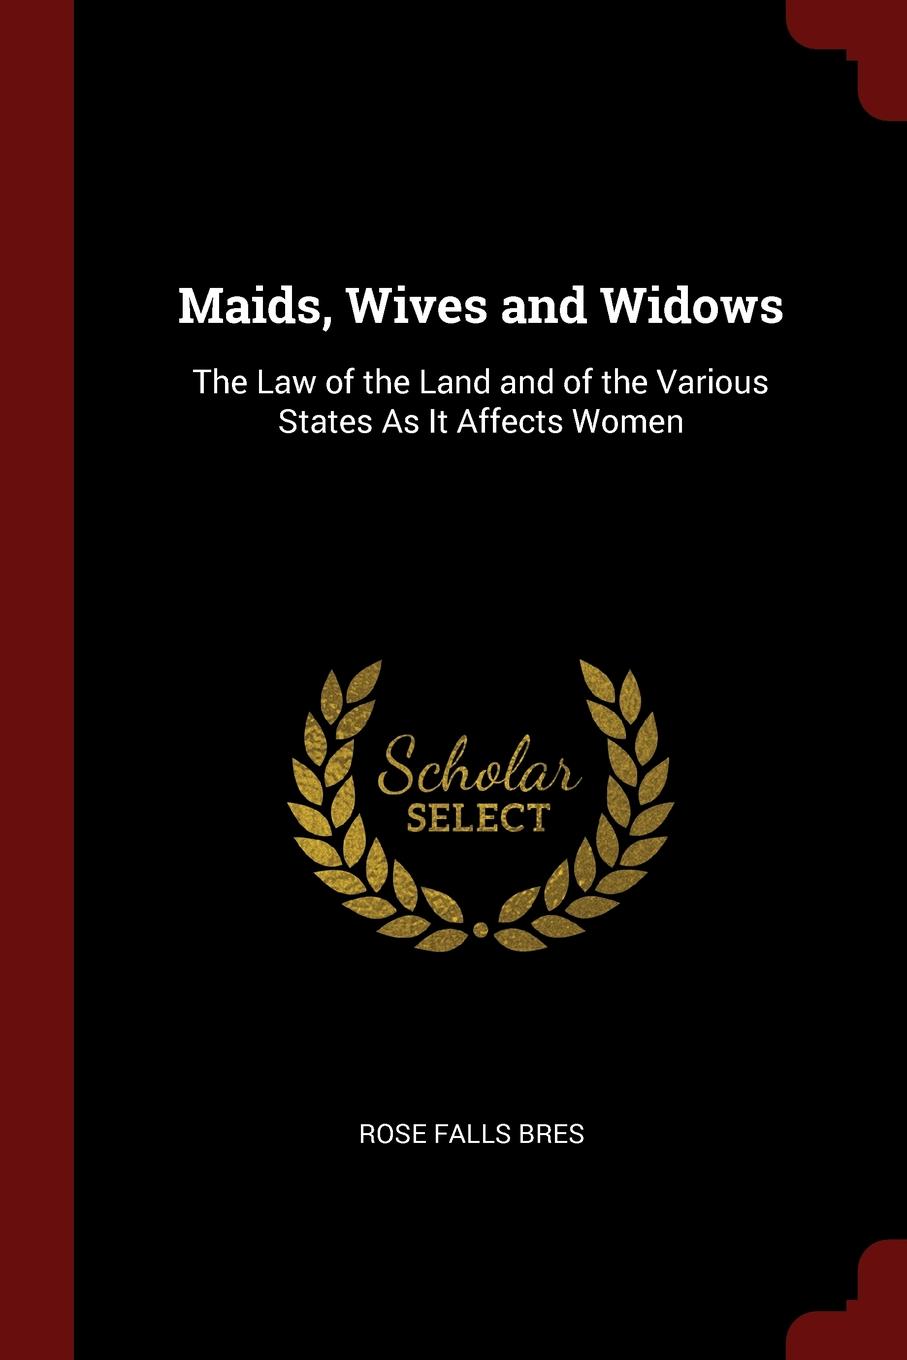 Maids, Wives and Widows. The Law of the Land and of the Various States As It Affects Women